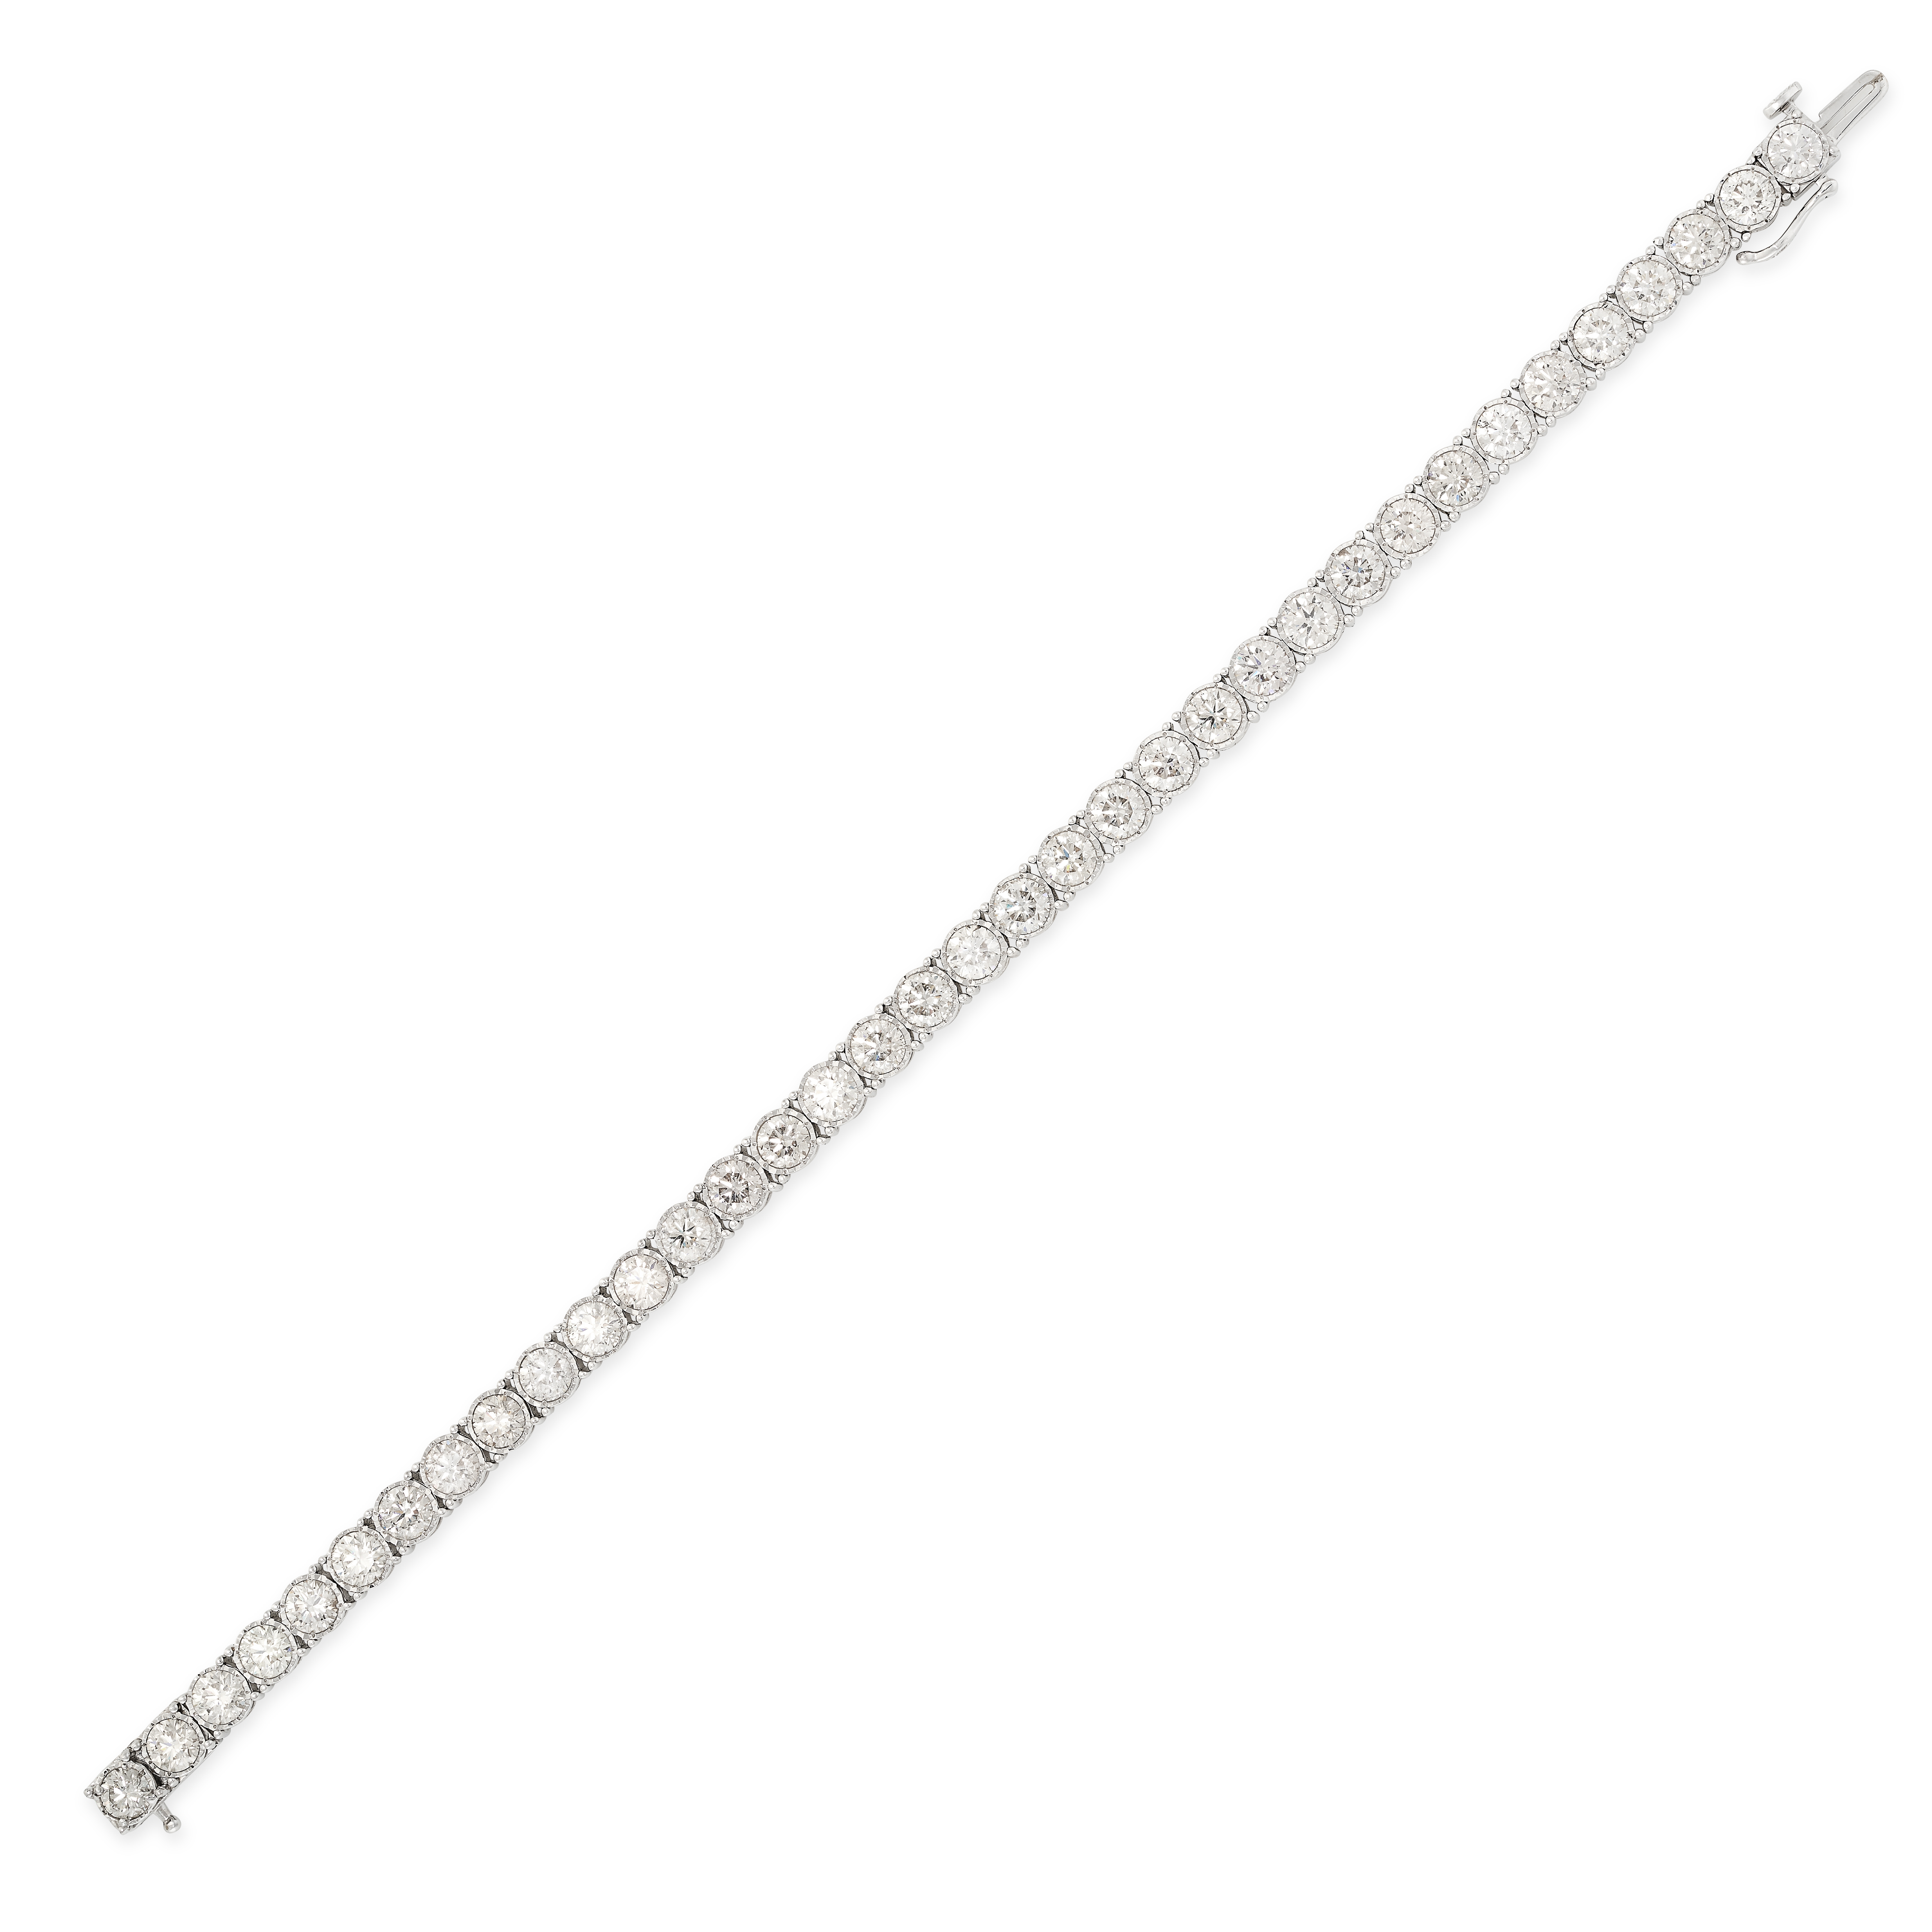 A DIAMOND LINE BRACELET in 9ct white gold, comprising a row of thirty-six round brilliant cut